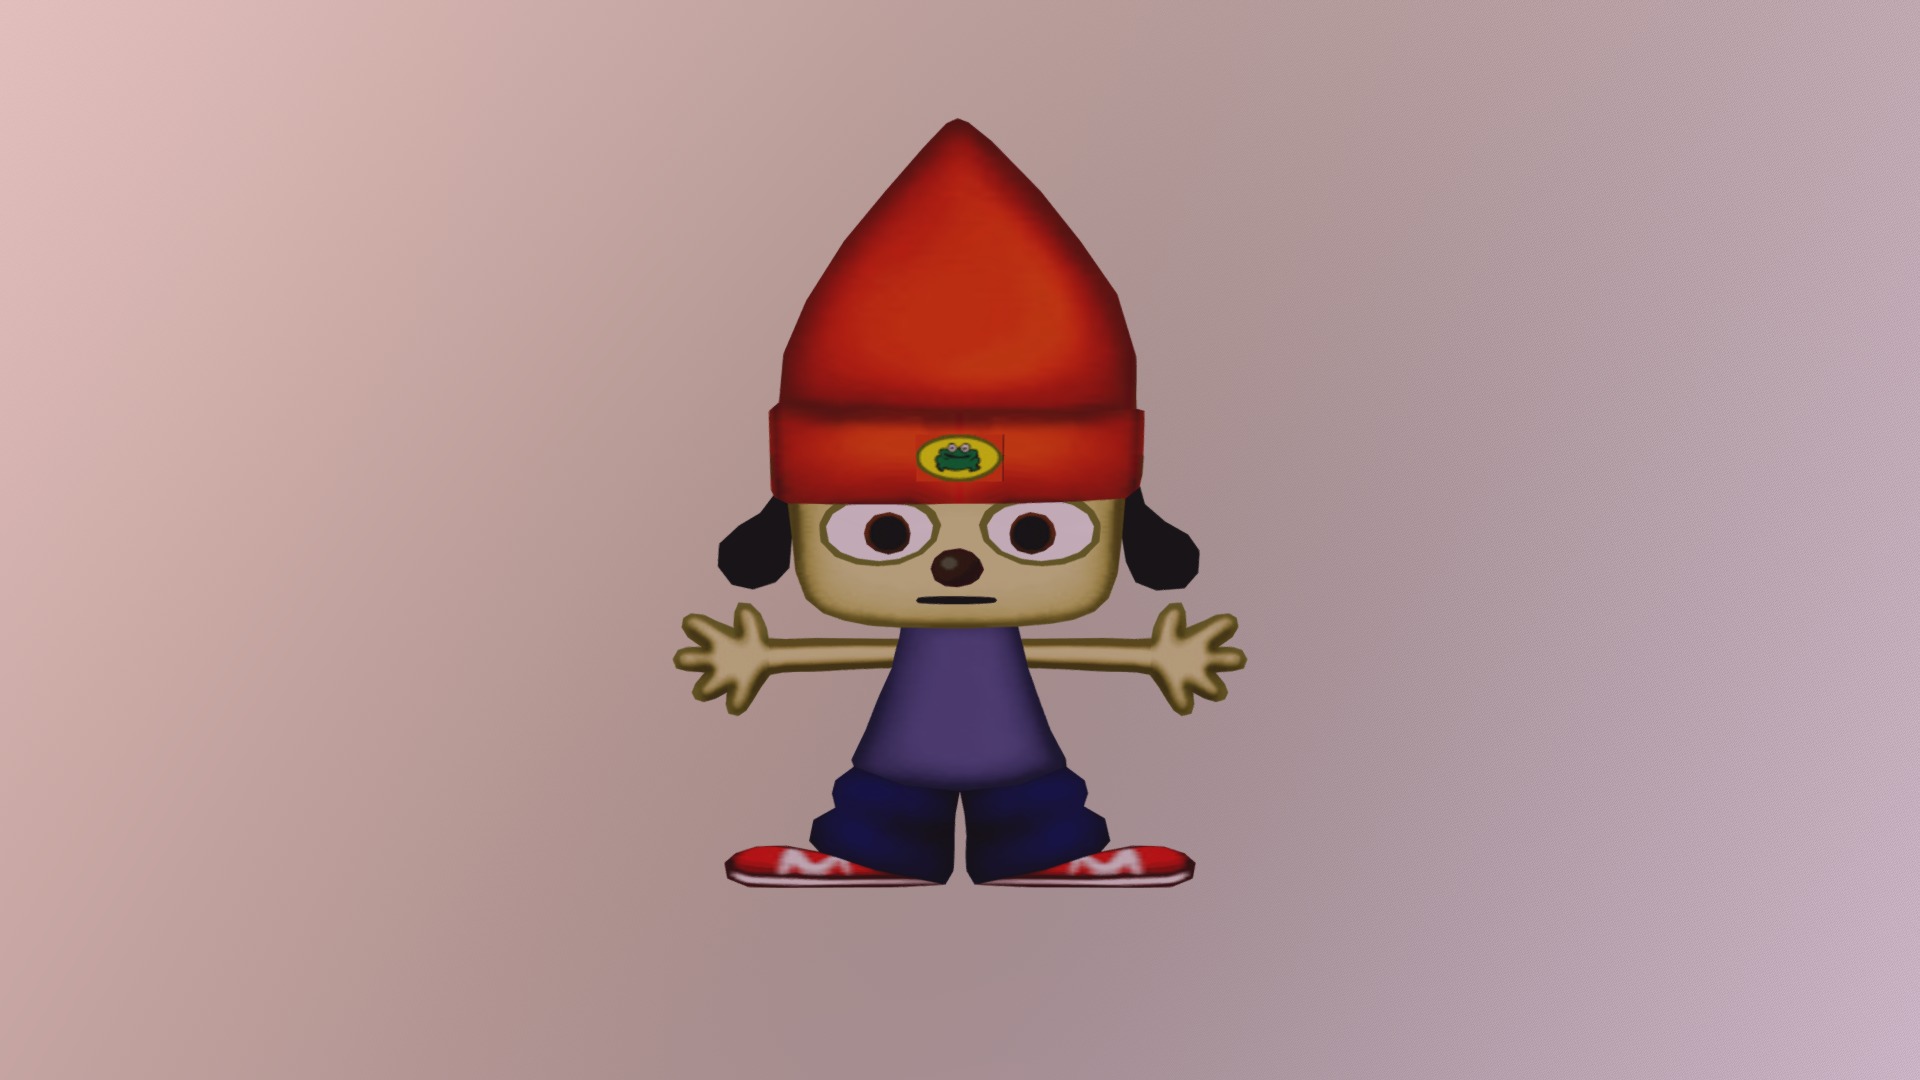 parappa the rapper 3D model ( i used blender) : r/Parappa